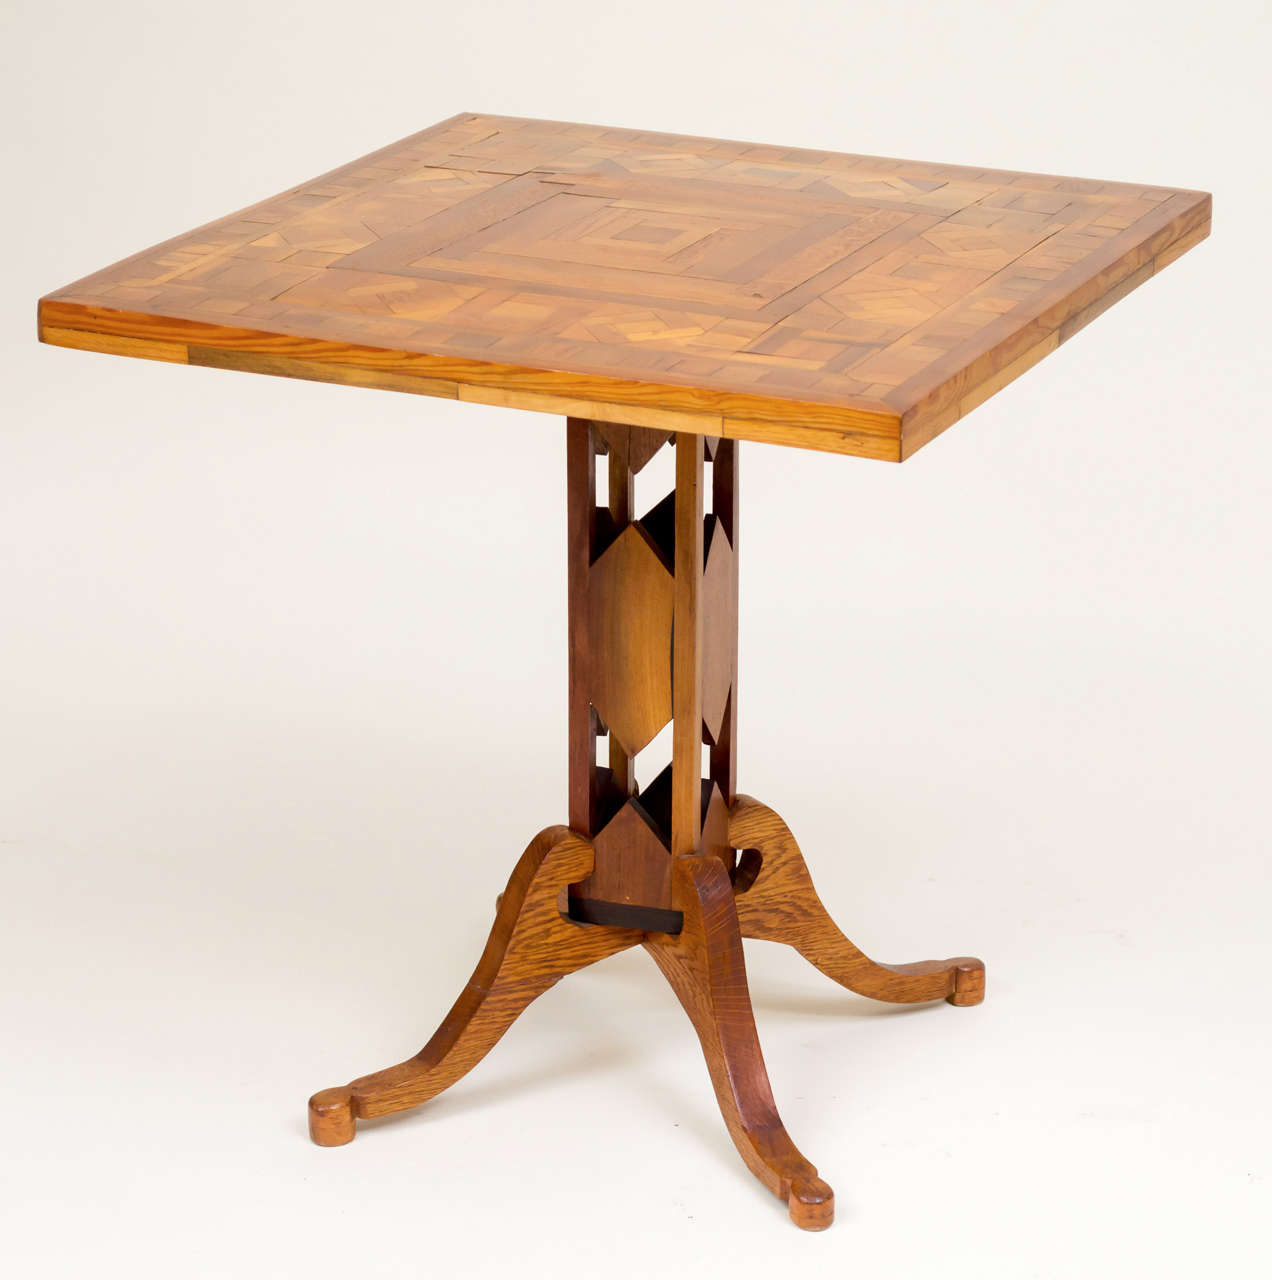 Early 20th century American Folk Art pedestal table. Interesting open work column supported by four curvilinear shaped oak legs. Intricate marquetry top, circa 1910-1920.